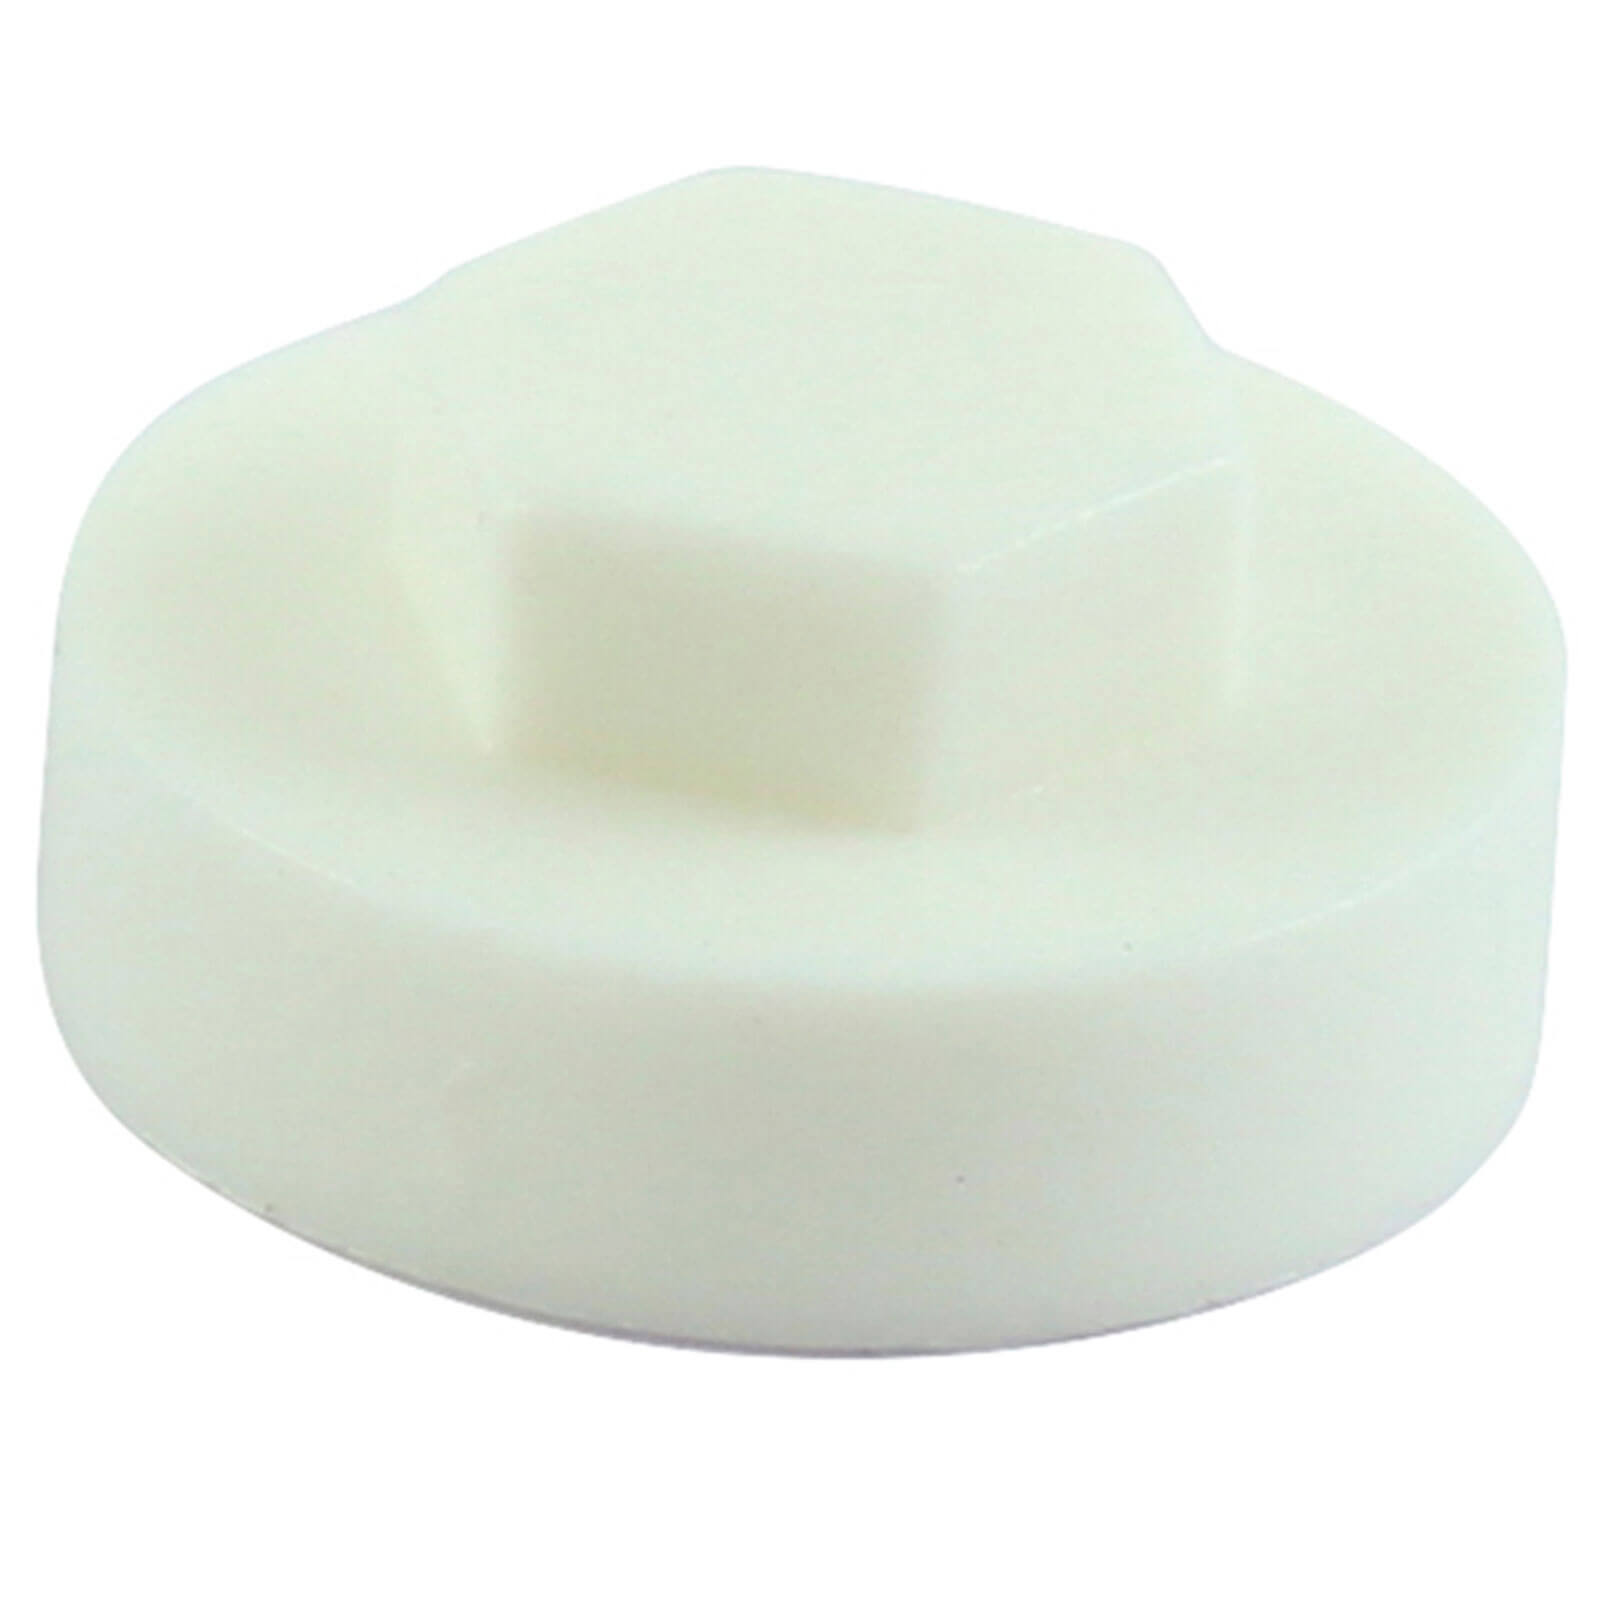 Image of Colour Match Hexagon Screw Cover Cap 5/16" x 19mm White Pack of 1000